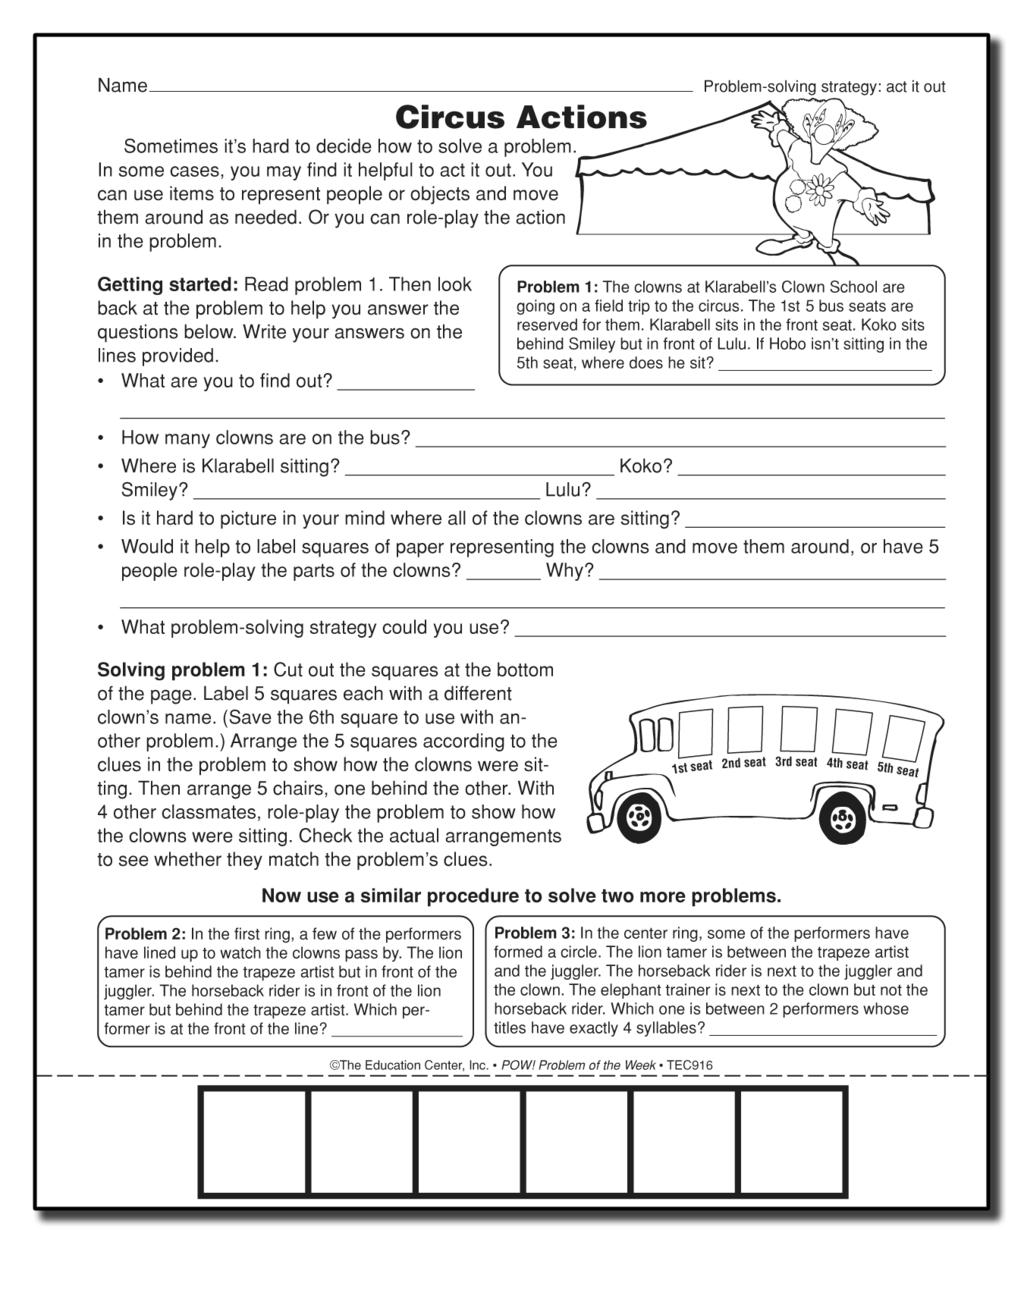 Lessons forteaching Problem-Solving Strategies Lesson 1: Act It Out Description of strategy: The act-it-out strategy involves having problem solvers either role-play or physically manipulate objects,